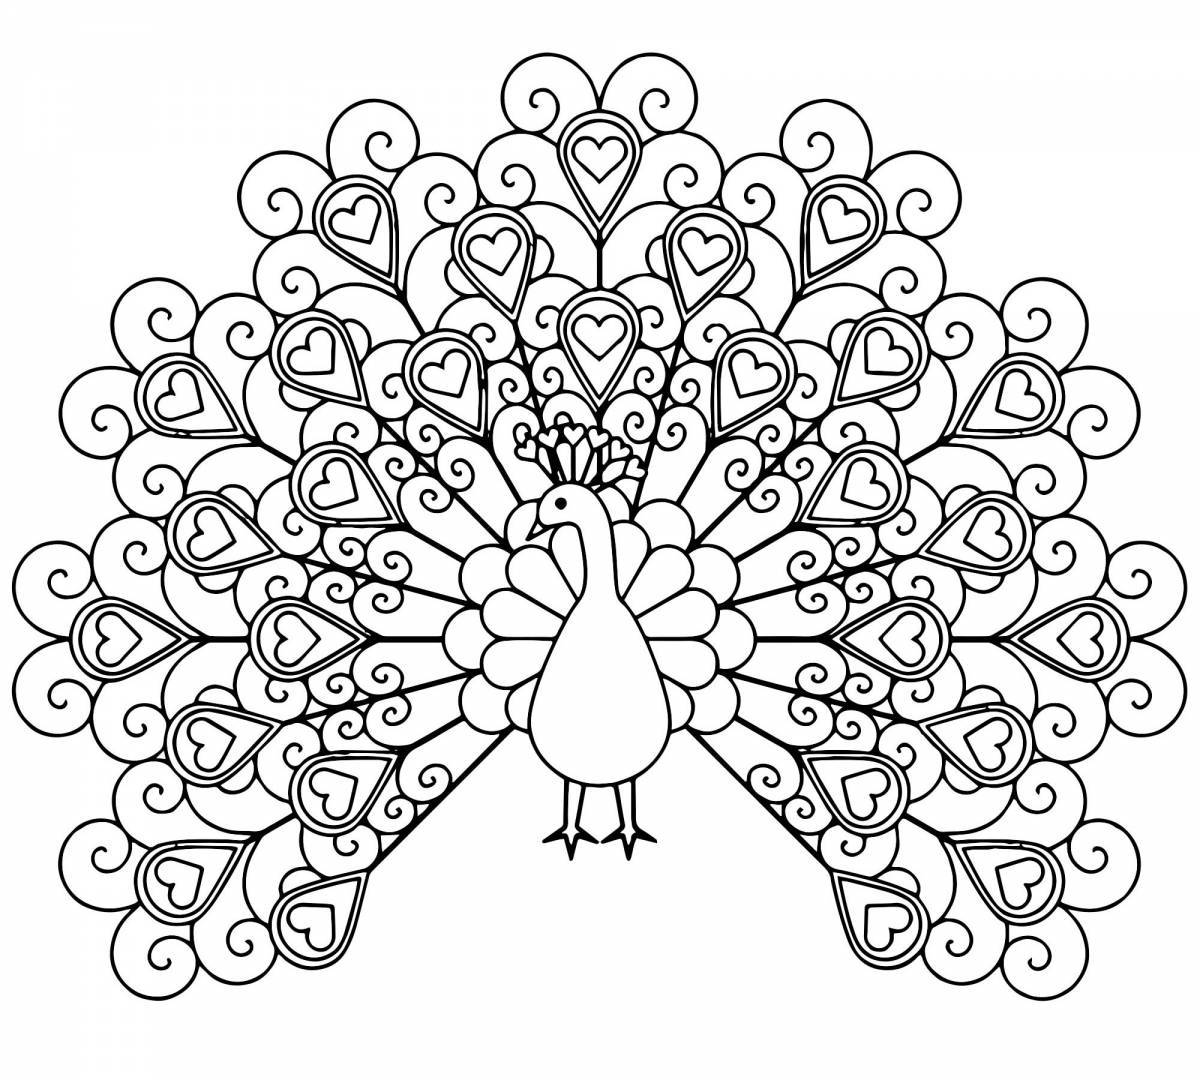 Colorful peacock coloring page for kids